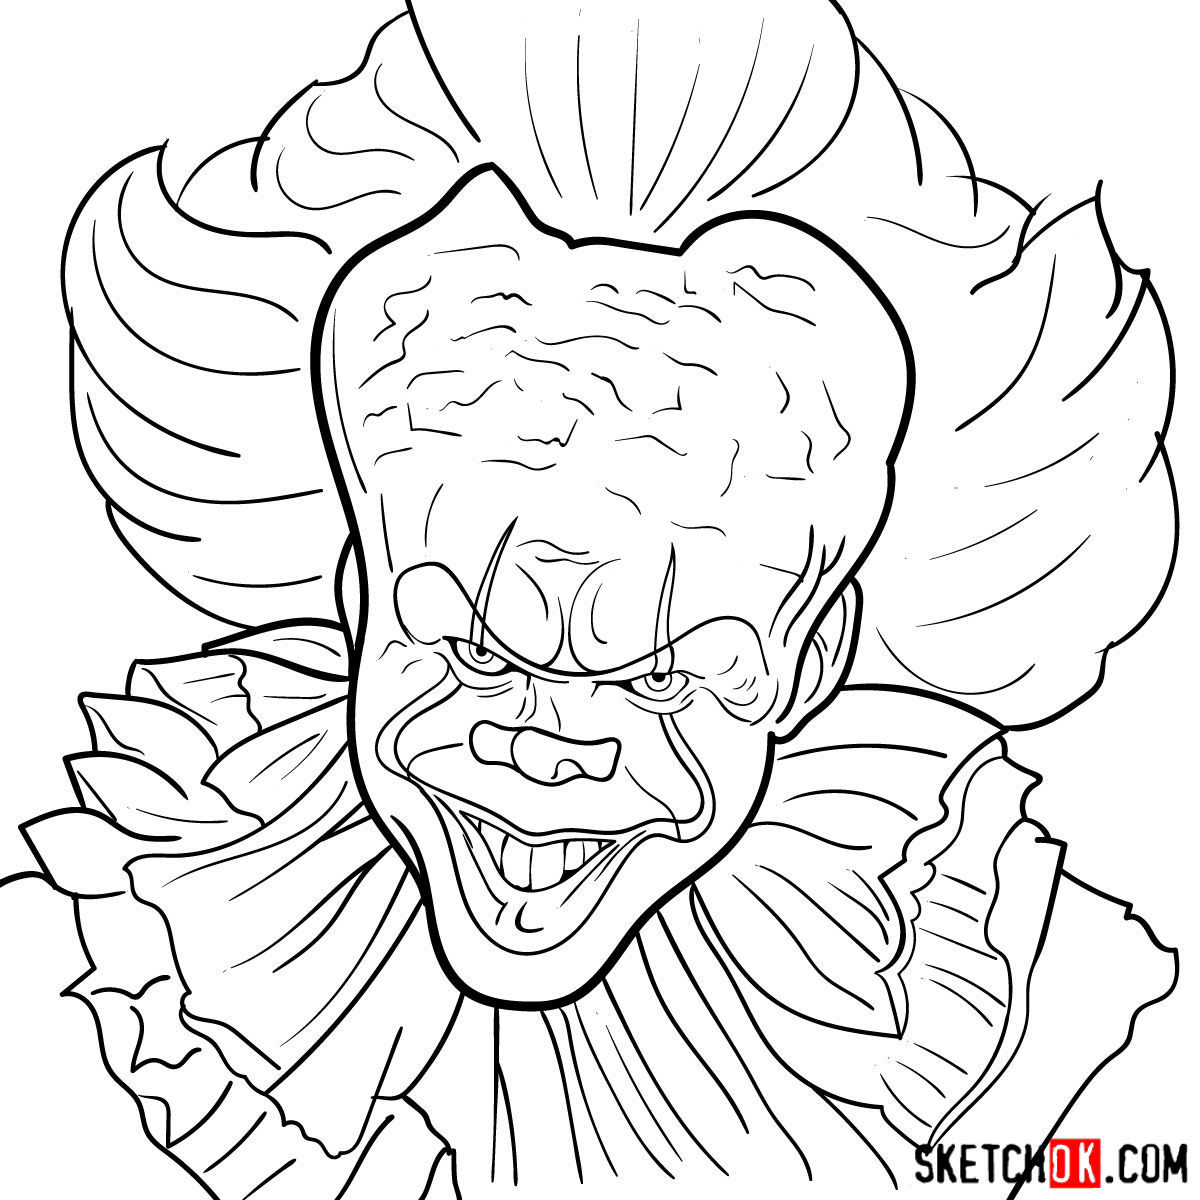 How to draw Pennywise the Dancing Clown step by step - step 11